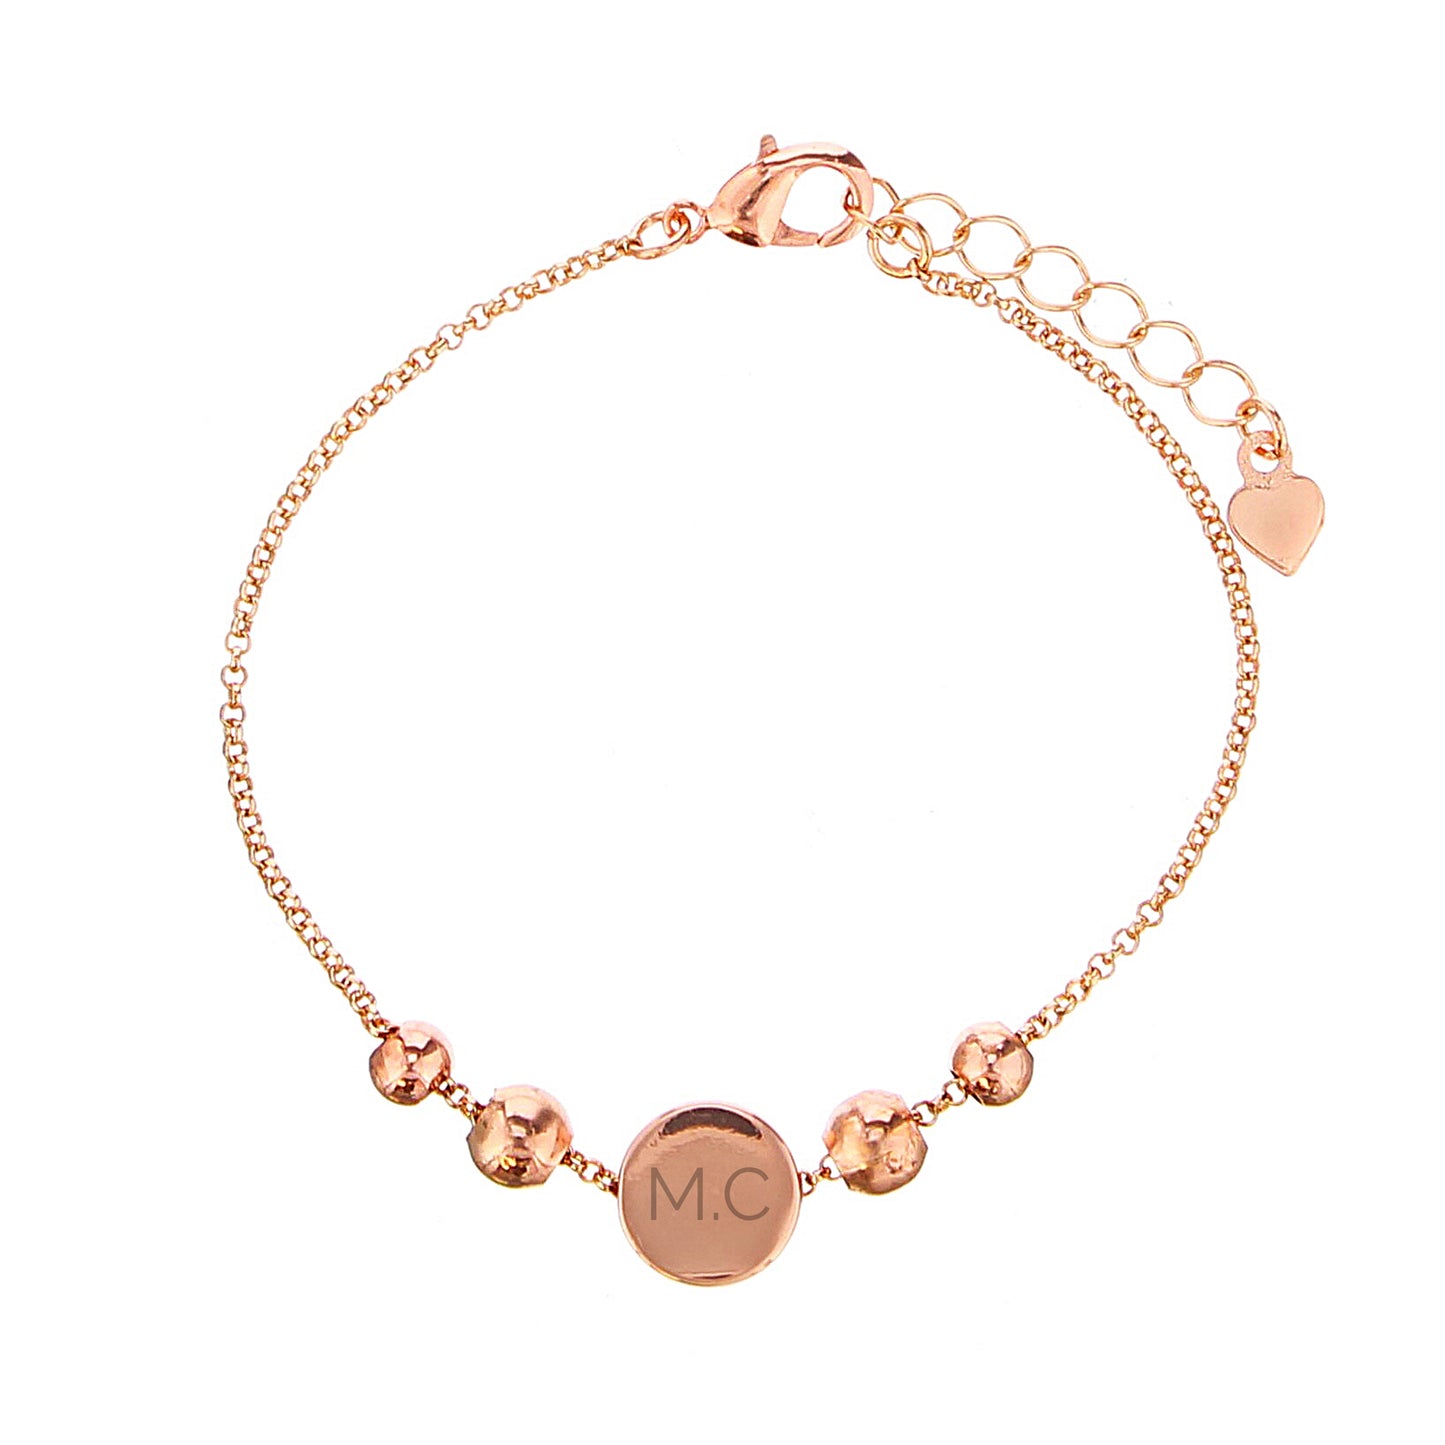 Personalised Rose Gold Tone Initials Disc Bracelet - Personalise It!